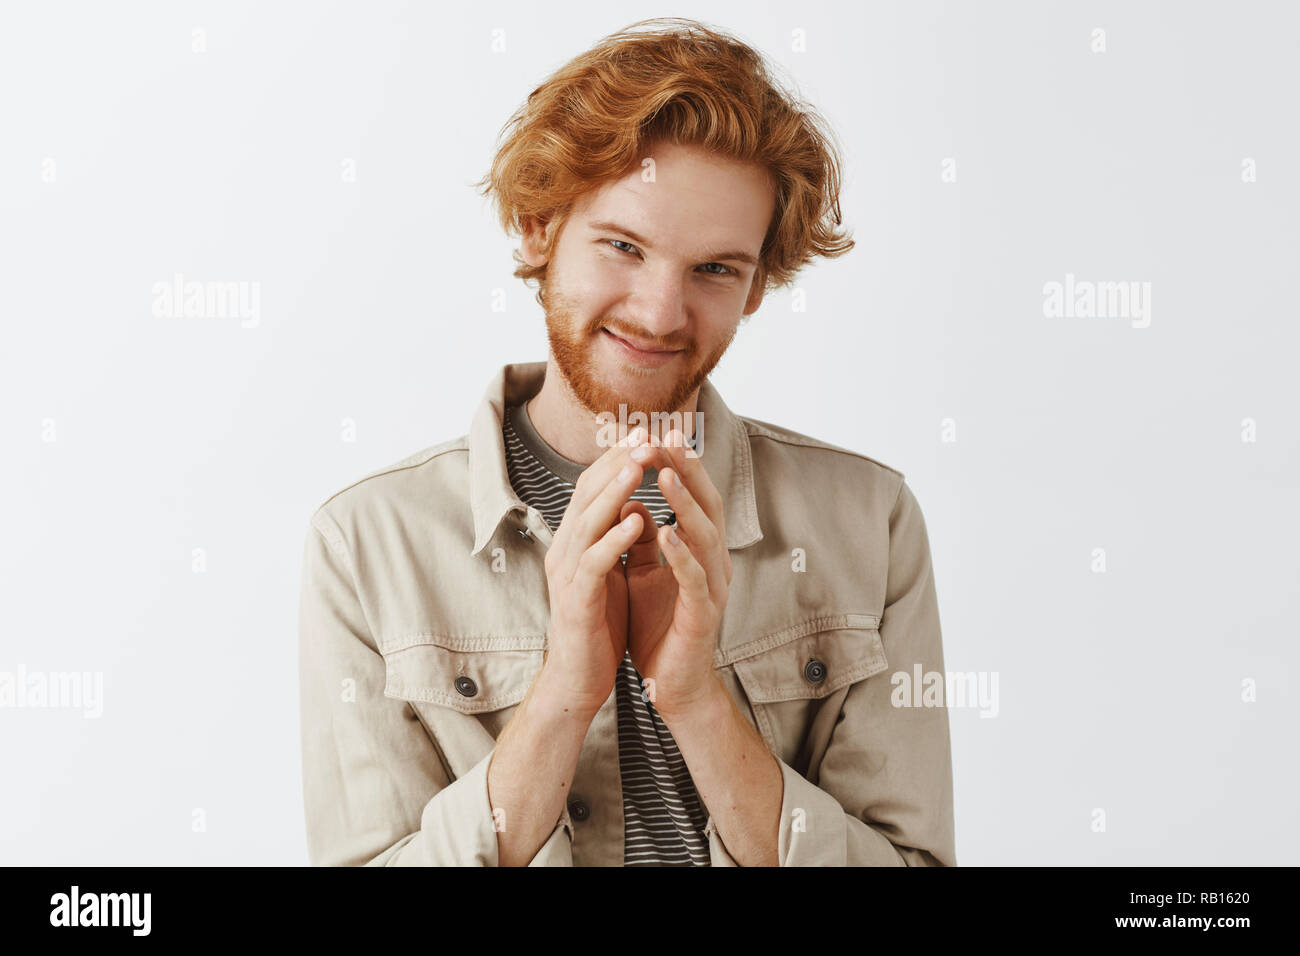 Redhead bearded man has tricky and evil plan on mind steepling fingers over chest and smirking mysteriously squinting at camera standing in beige jacket over gray background. Evil genius in action Stock Photo